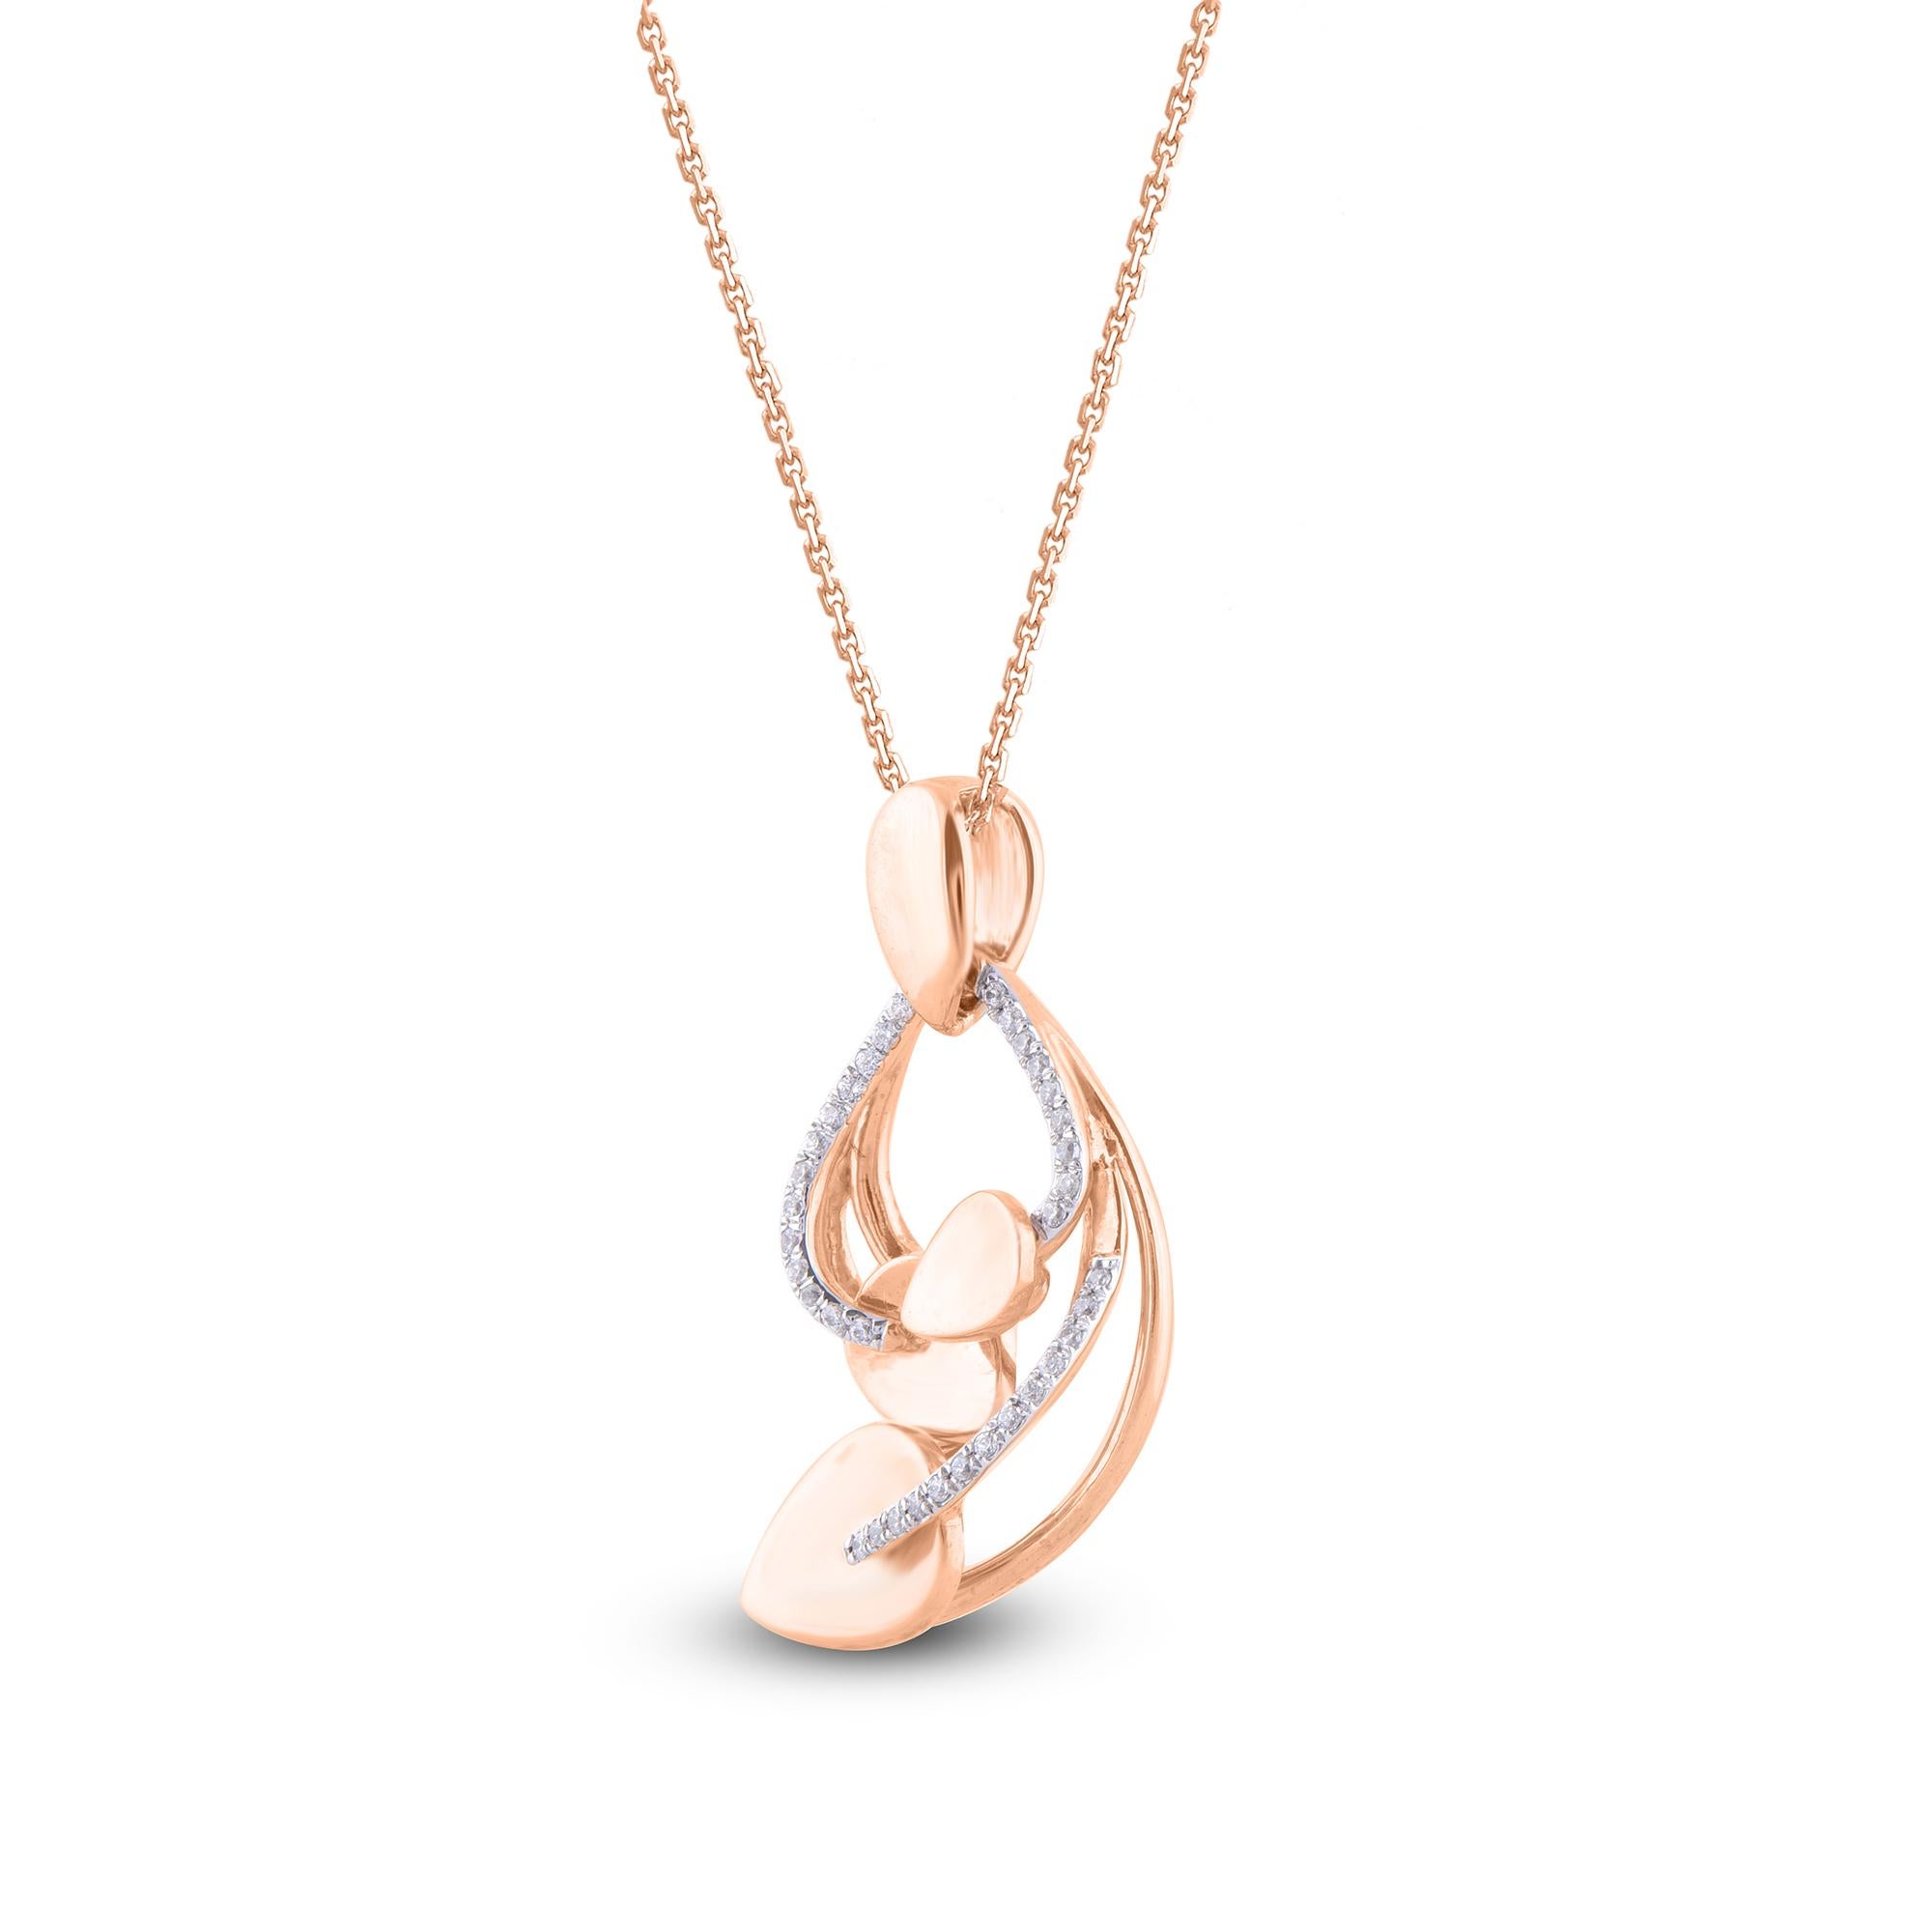 Charming as can be, this designer leaf diamond pendant is charming reminder of fun. Shimmering with 34 round diamond set in micro prong setting and crafted by our in-house experts in 14 karat rose gold. The total diamond weight is 0.15 carat and it